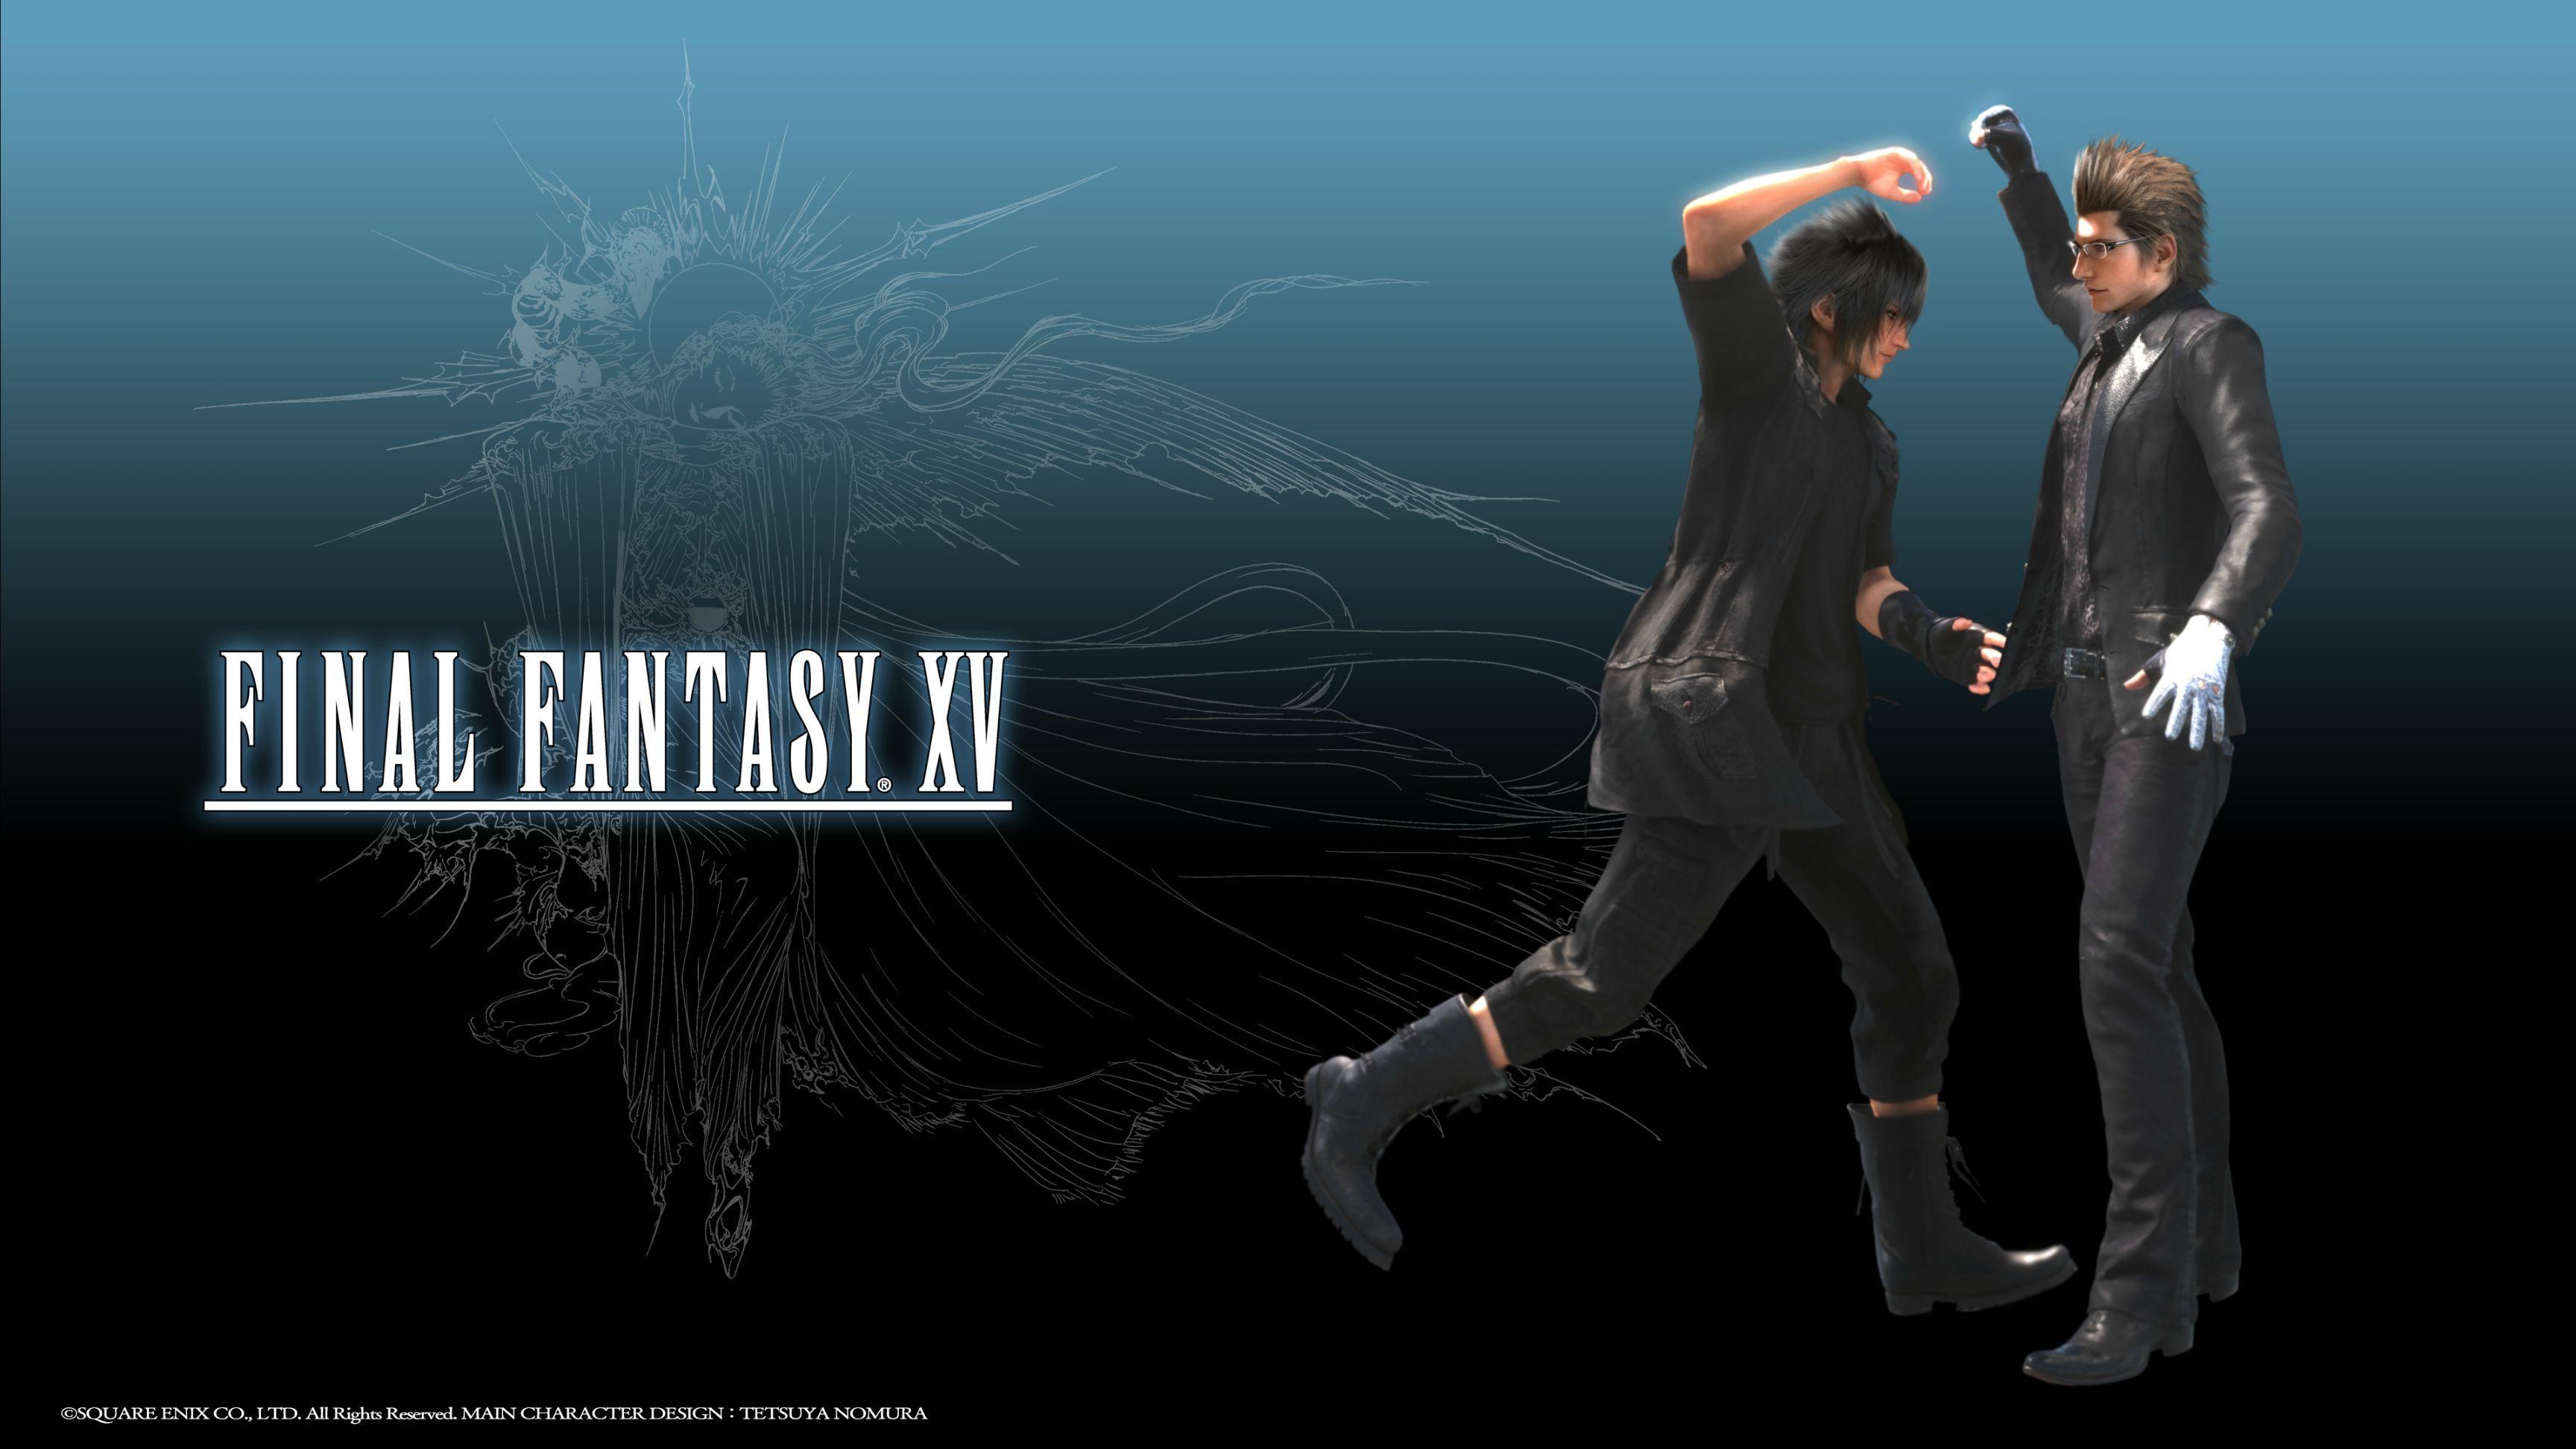 Final Fantasy XV Episode Duscae. OT. Brought to you